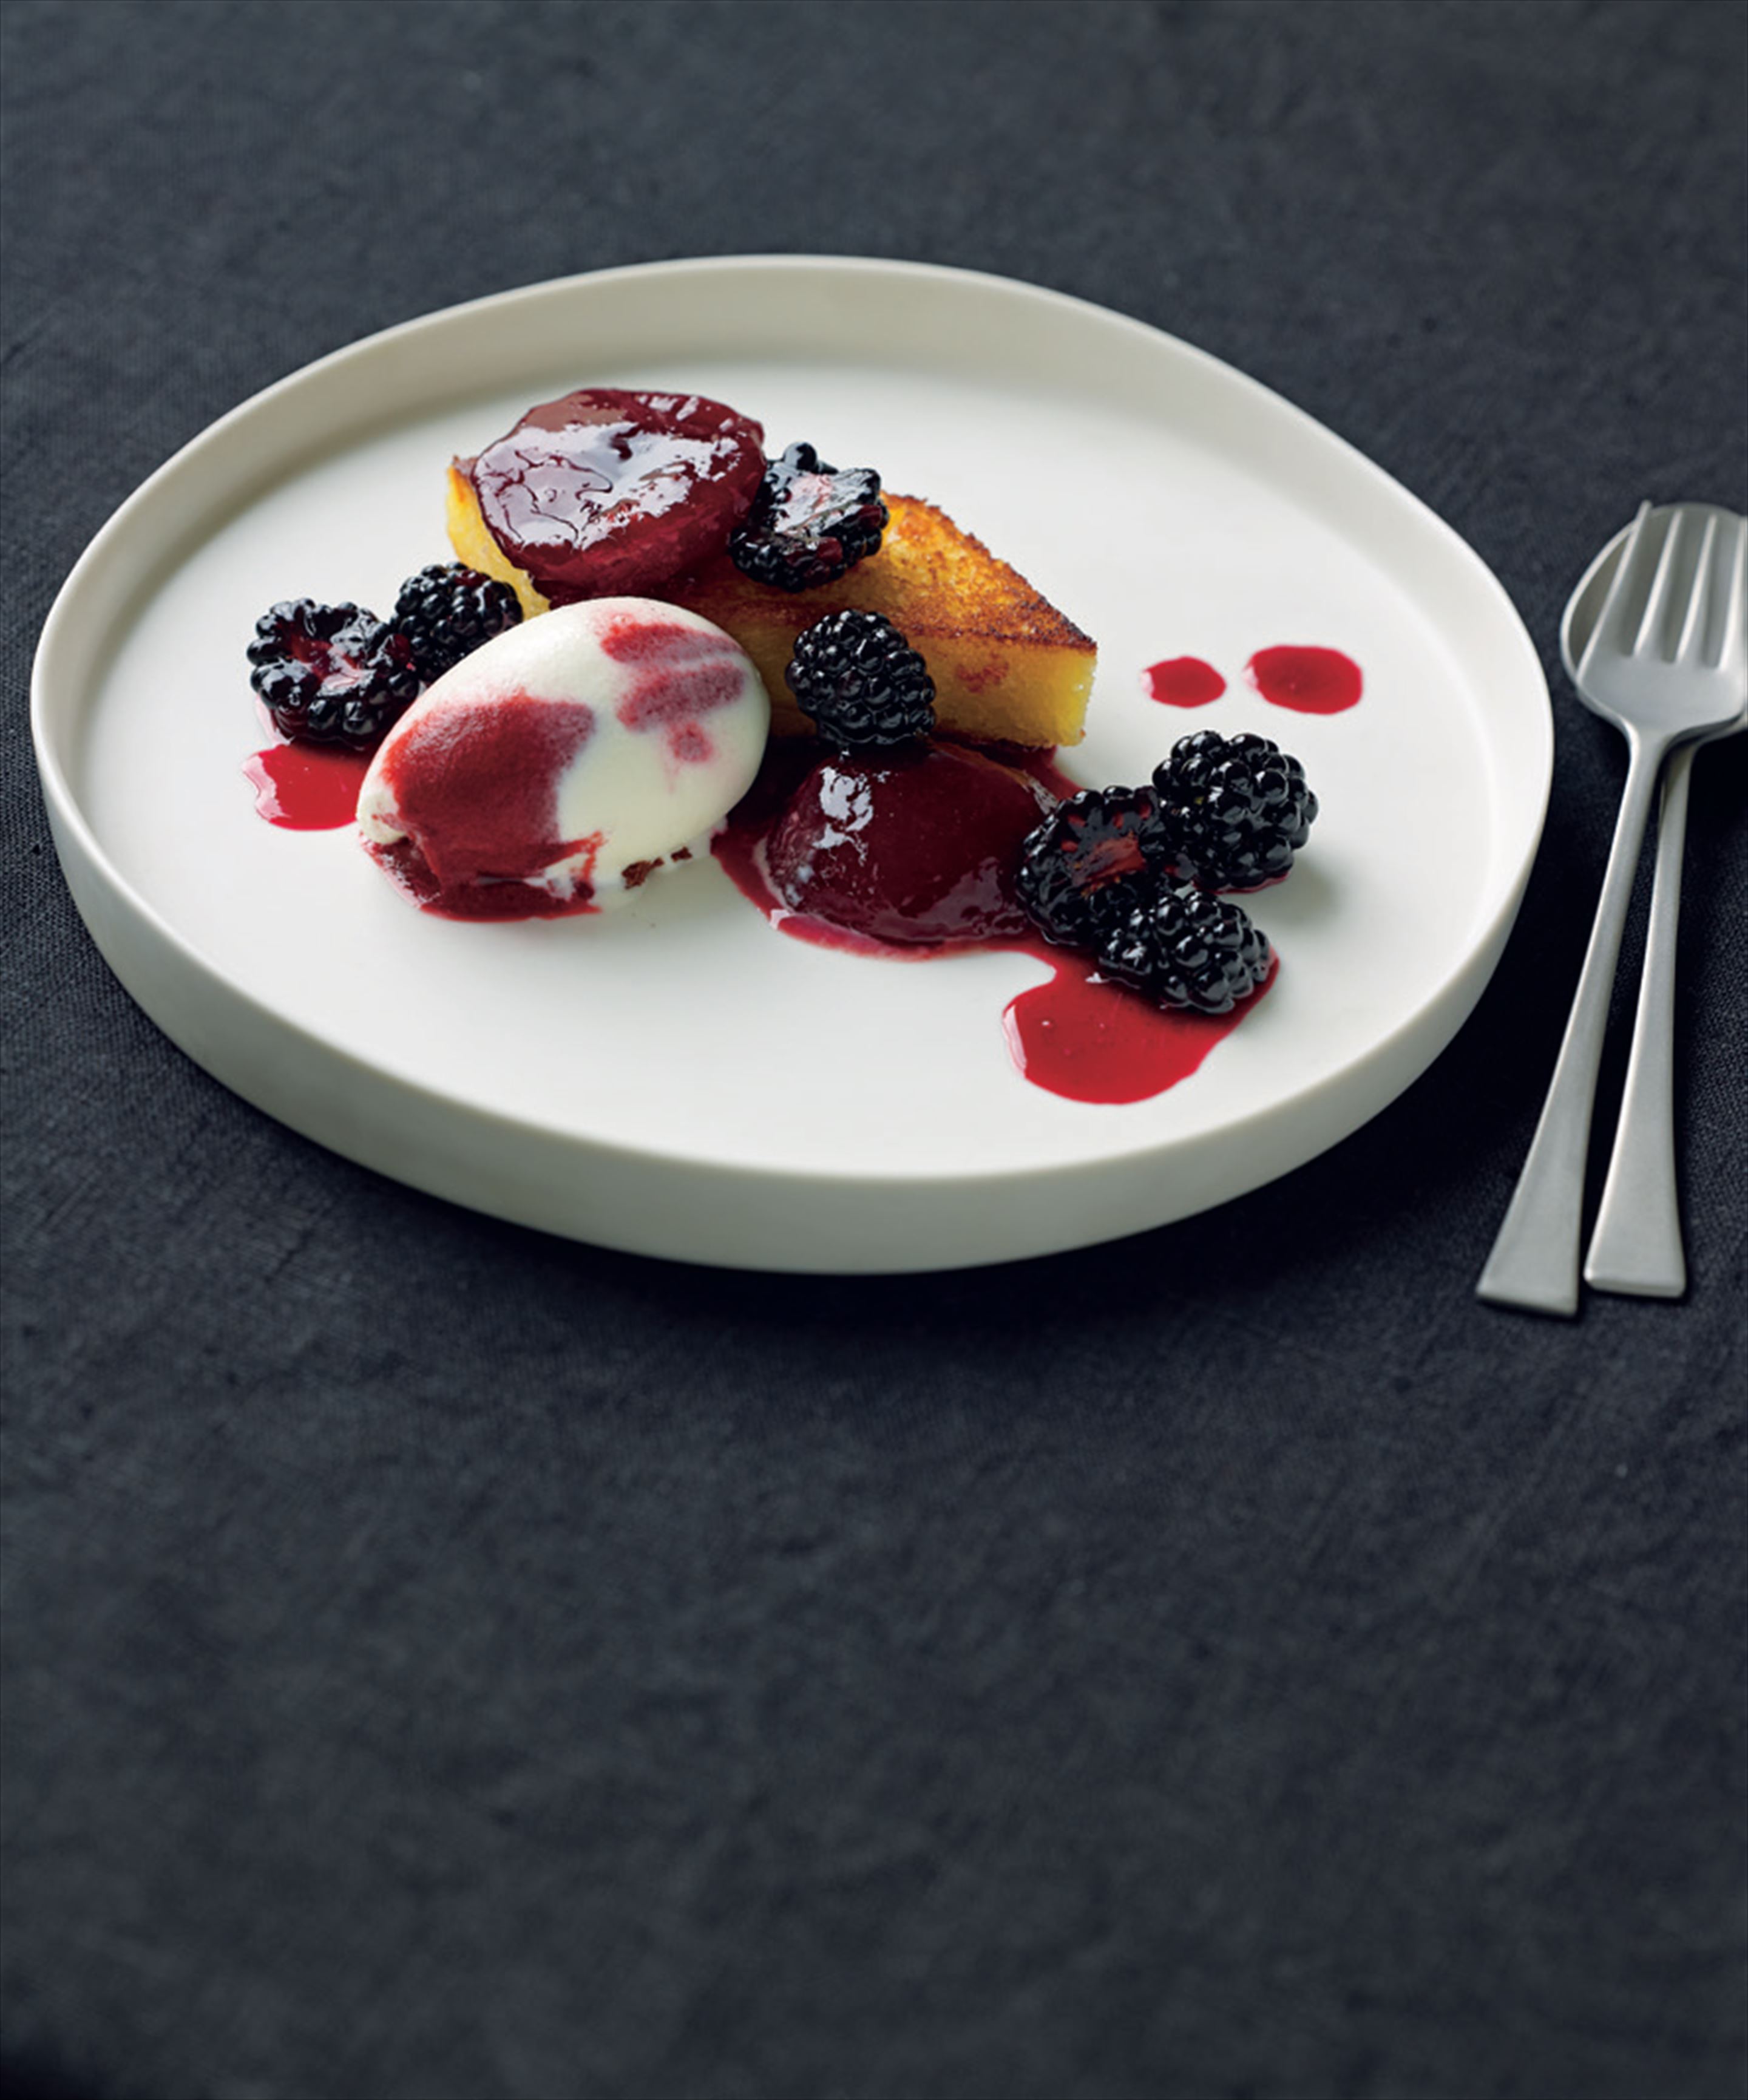 Pain perdu with blood plum and blackberry and yoghurt sorbet